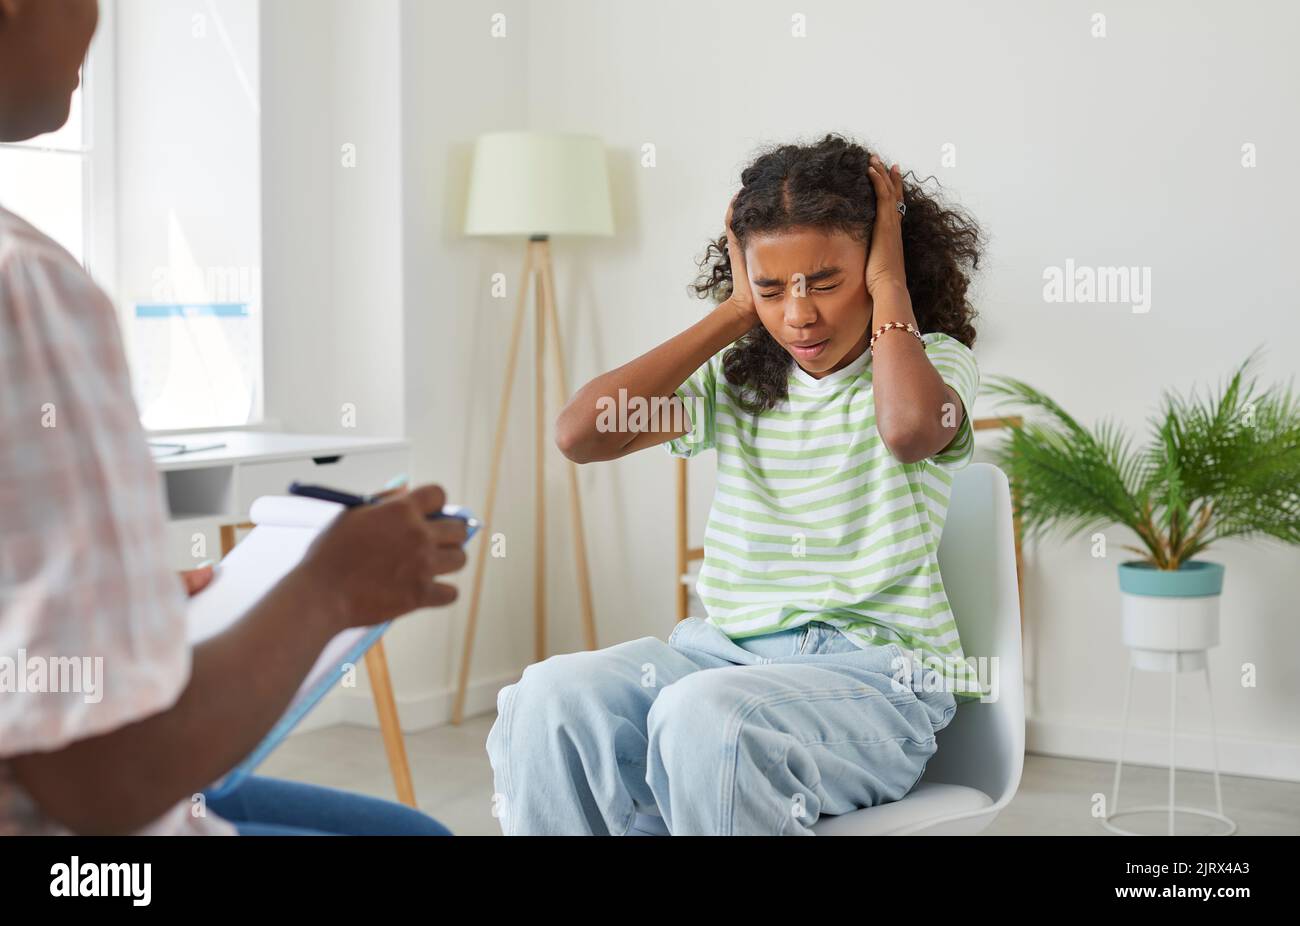 Teenage girl with negative mood shows that she does not want to listen to psychologist. Stock Photo